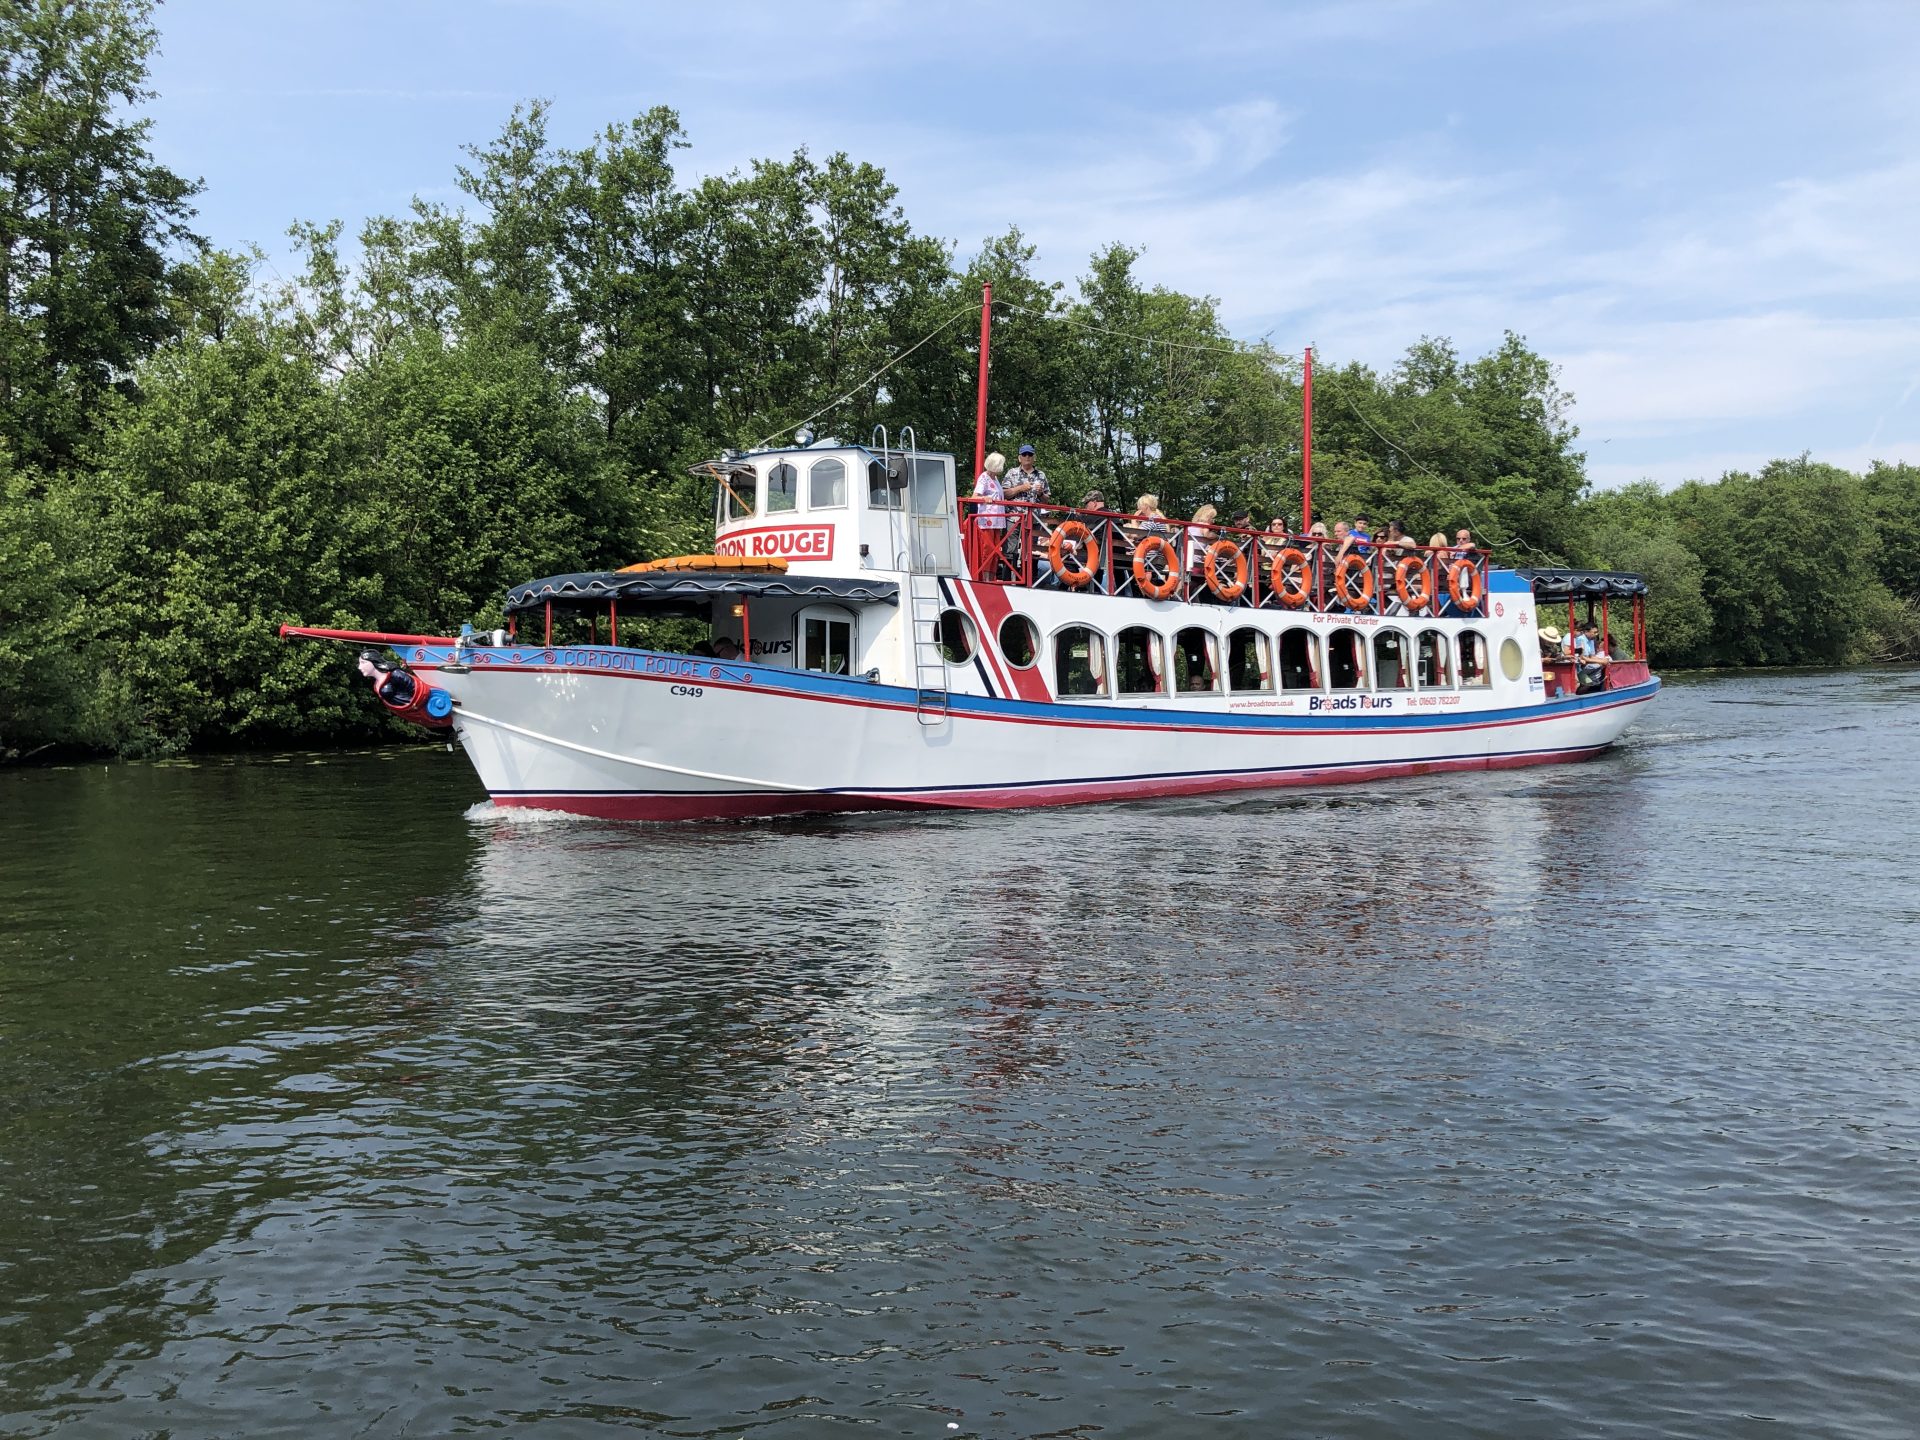 This has got to be one of my favourite looking river trip boats. Most of the others look either 'Space Age' or like a double-decker broads cruiser with a 'Changing Rooms' makeover. At least this has a sheerline